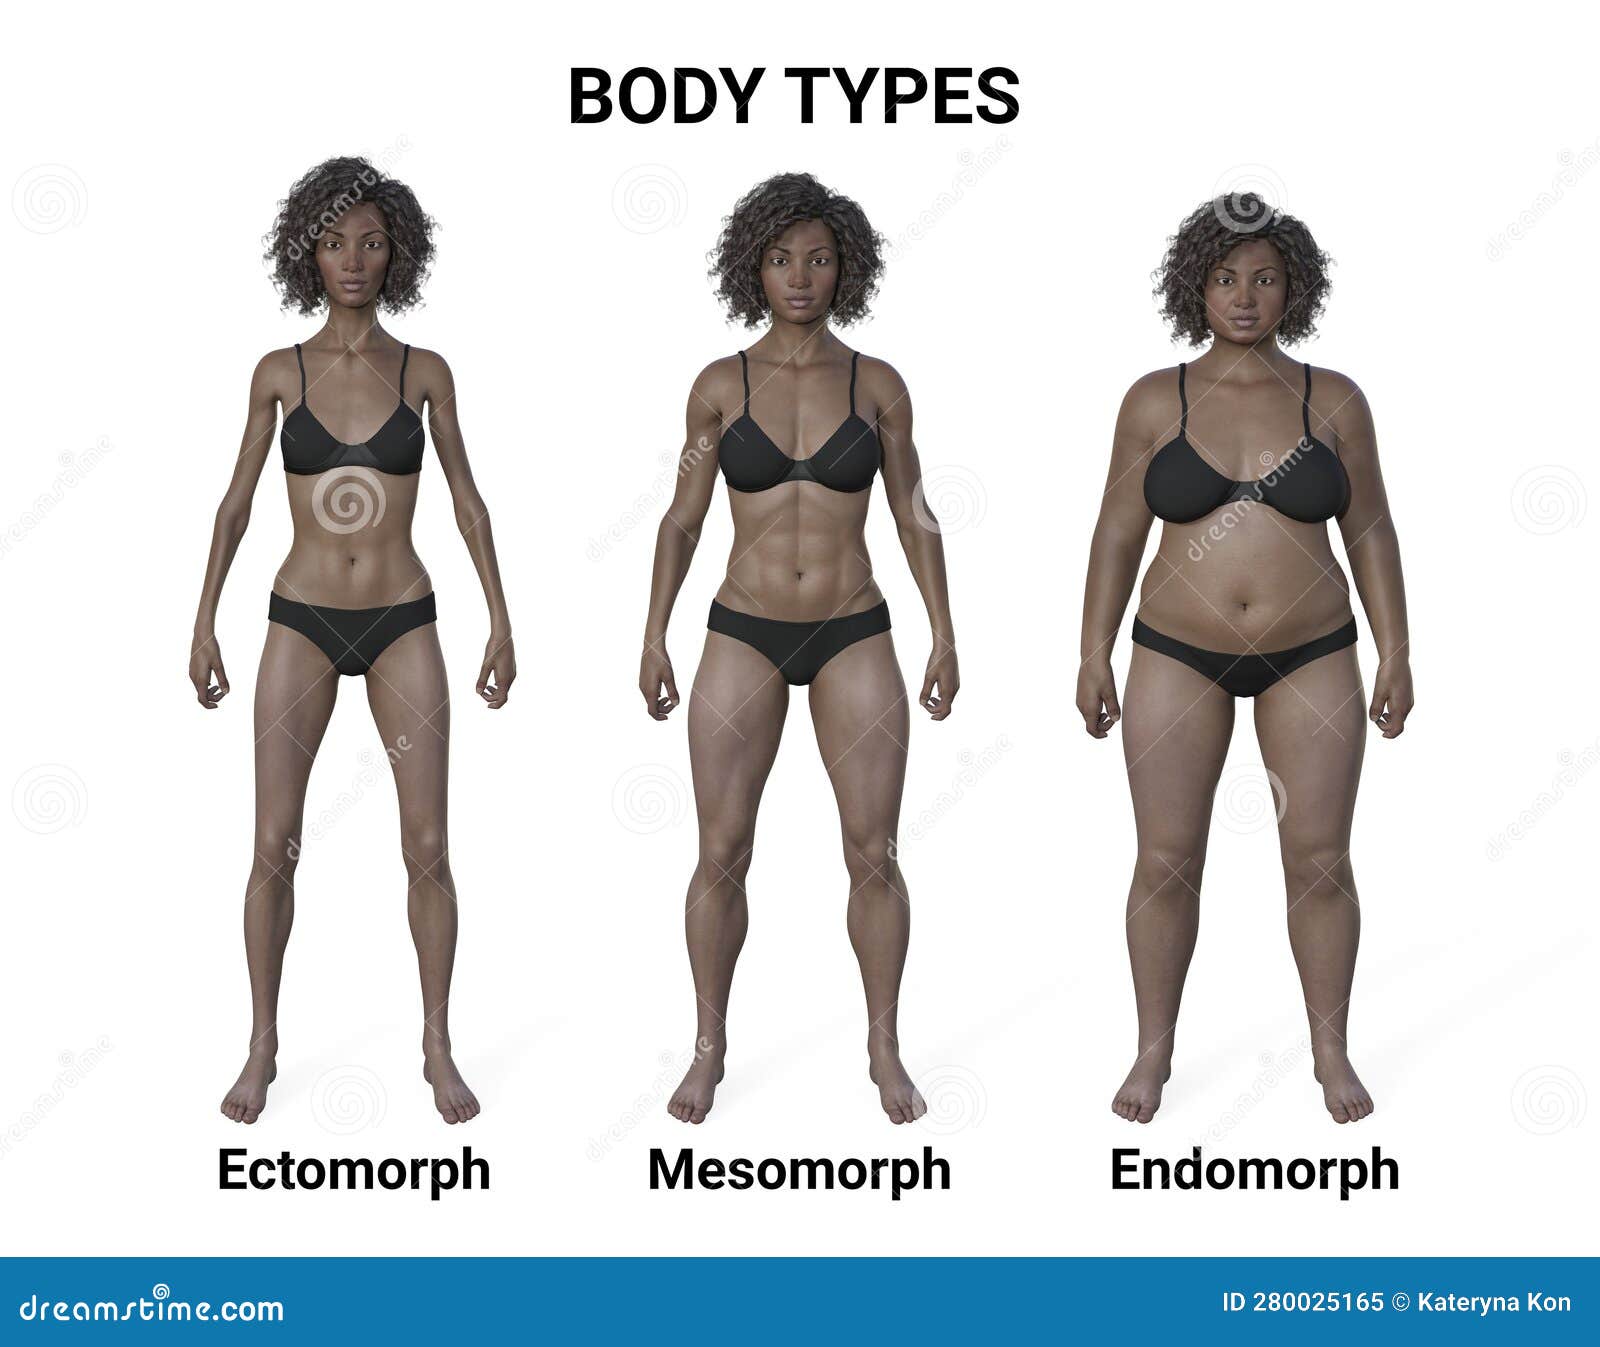 A 3D Illustration of a Female Body Showcasing Three Different Body